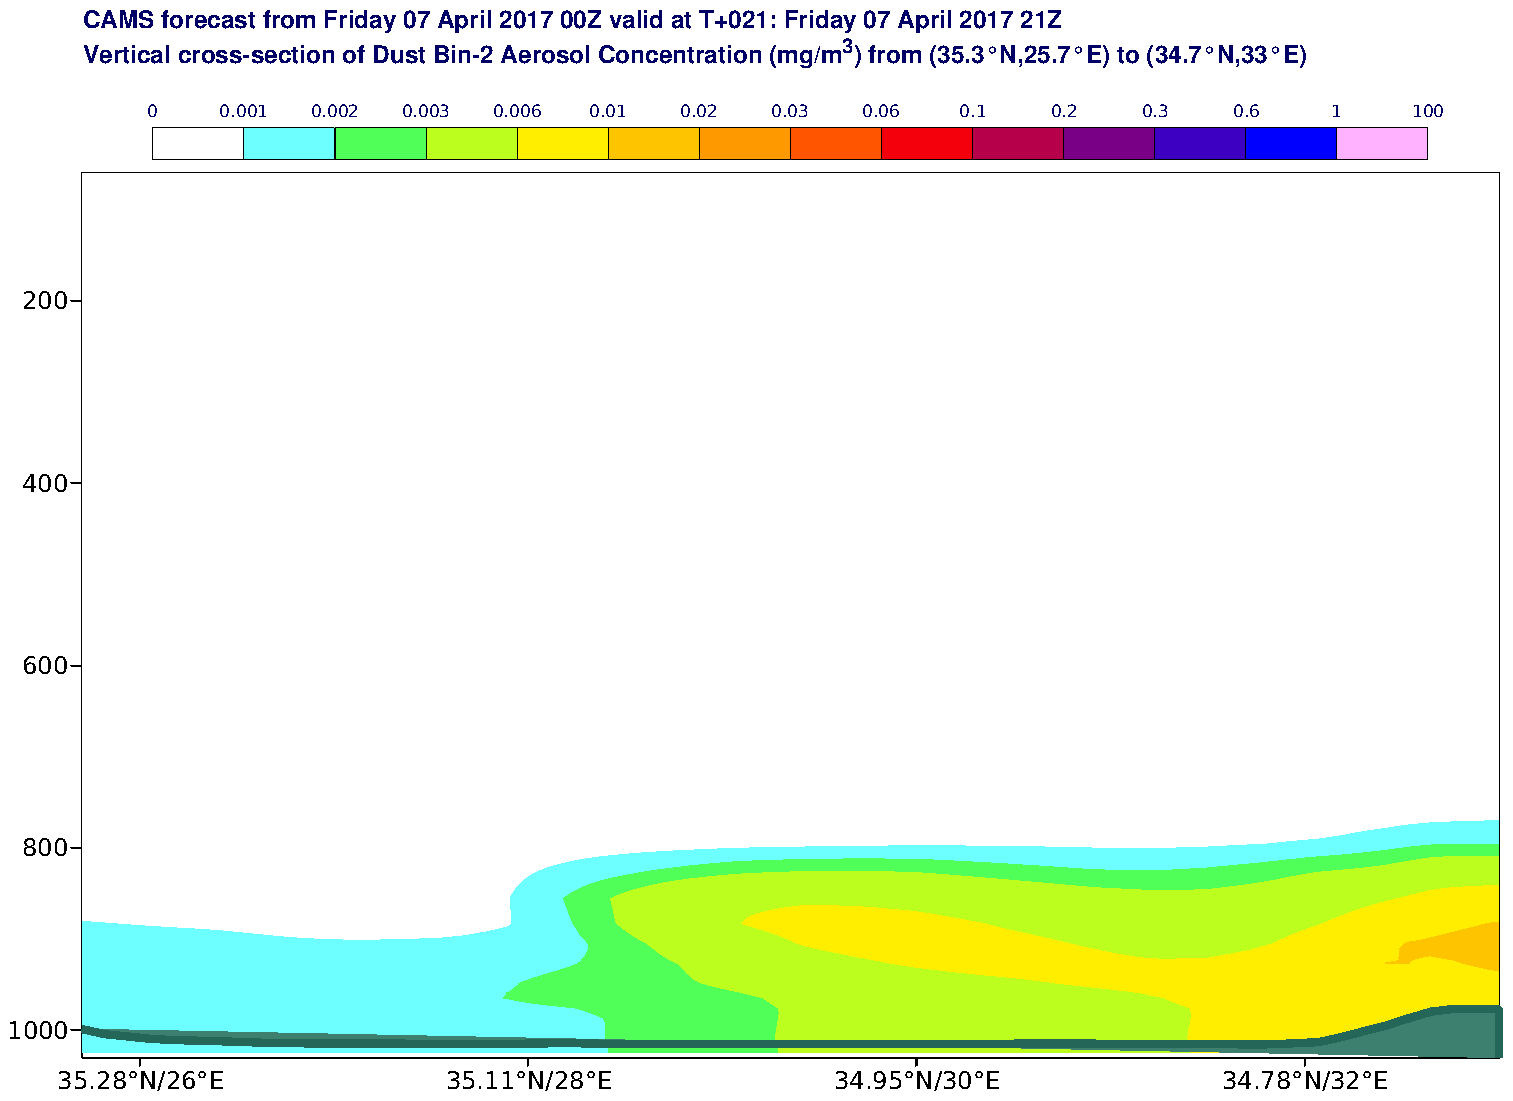 Vertical cross-section of Dust Bin-2 Aerosol Concentration (mg/m3) valid at T21 - 2017-04-07 21:00